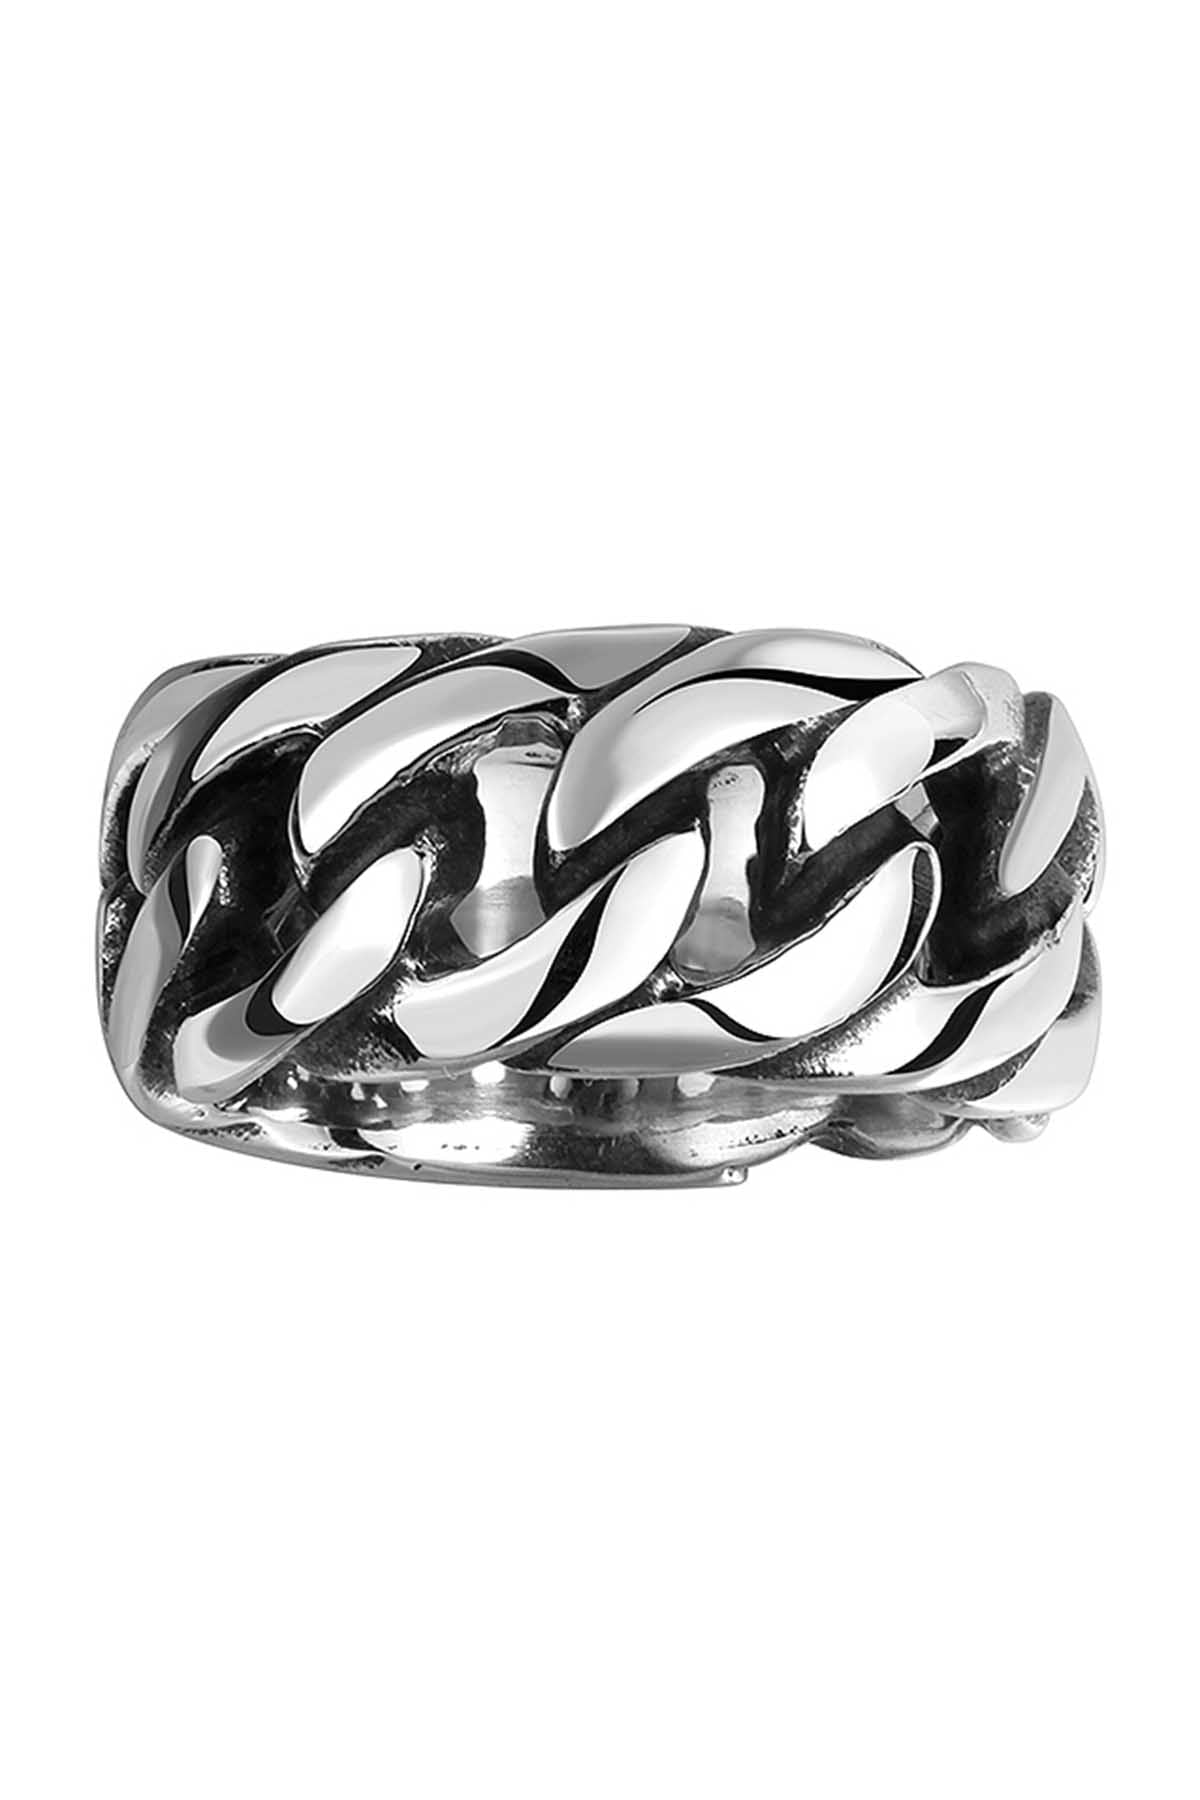 Gomaya Personality Chain Stainless Steel Ring